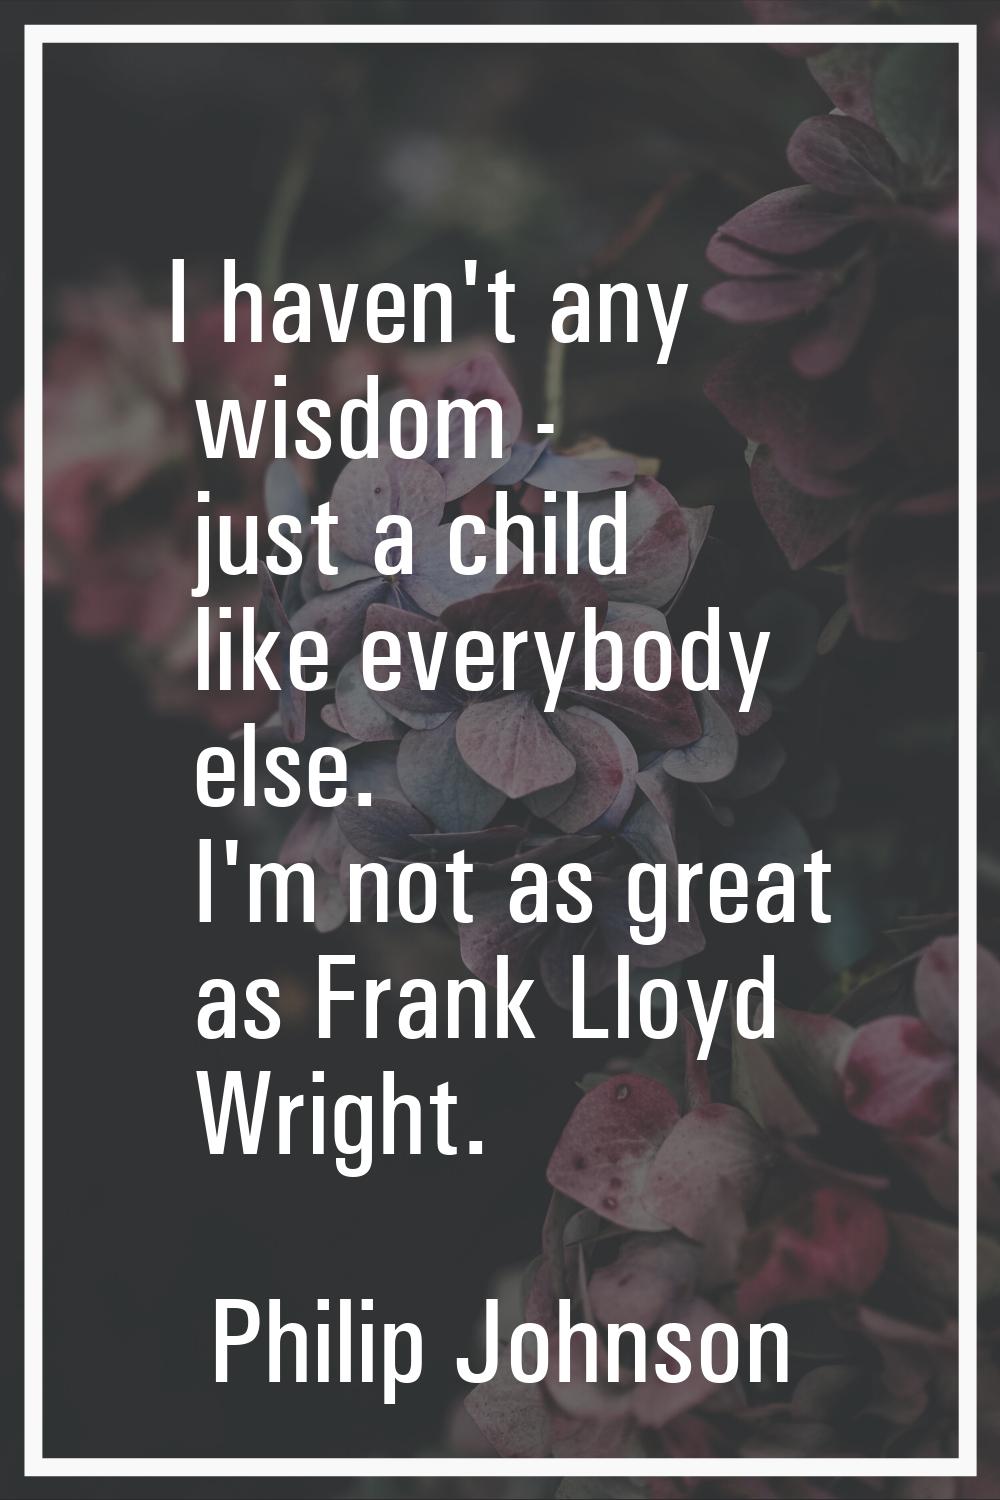 I haven't any wisdom - just a child like everybody else. I'm not as great as Frank Lloyd Wright.